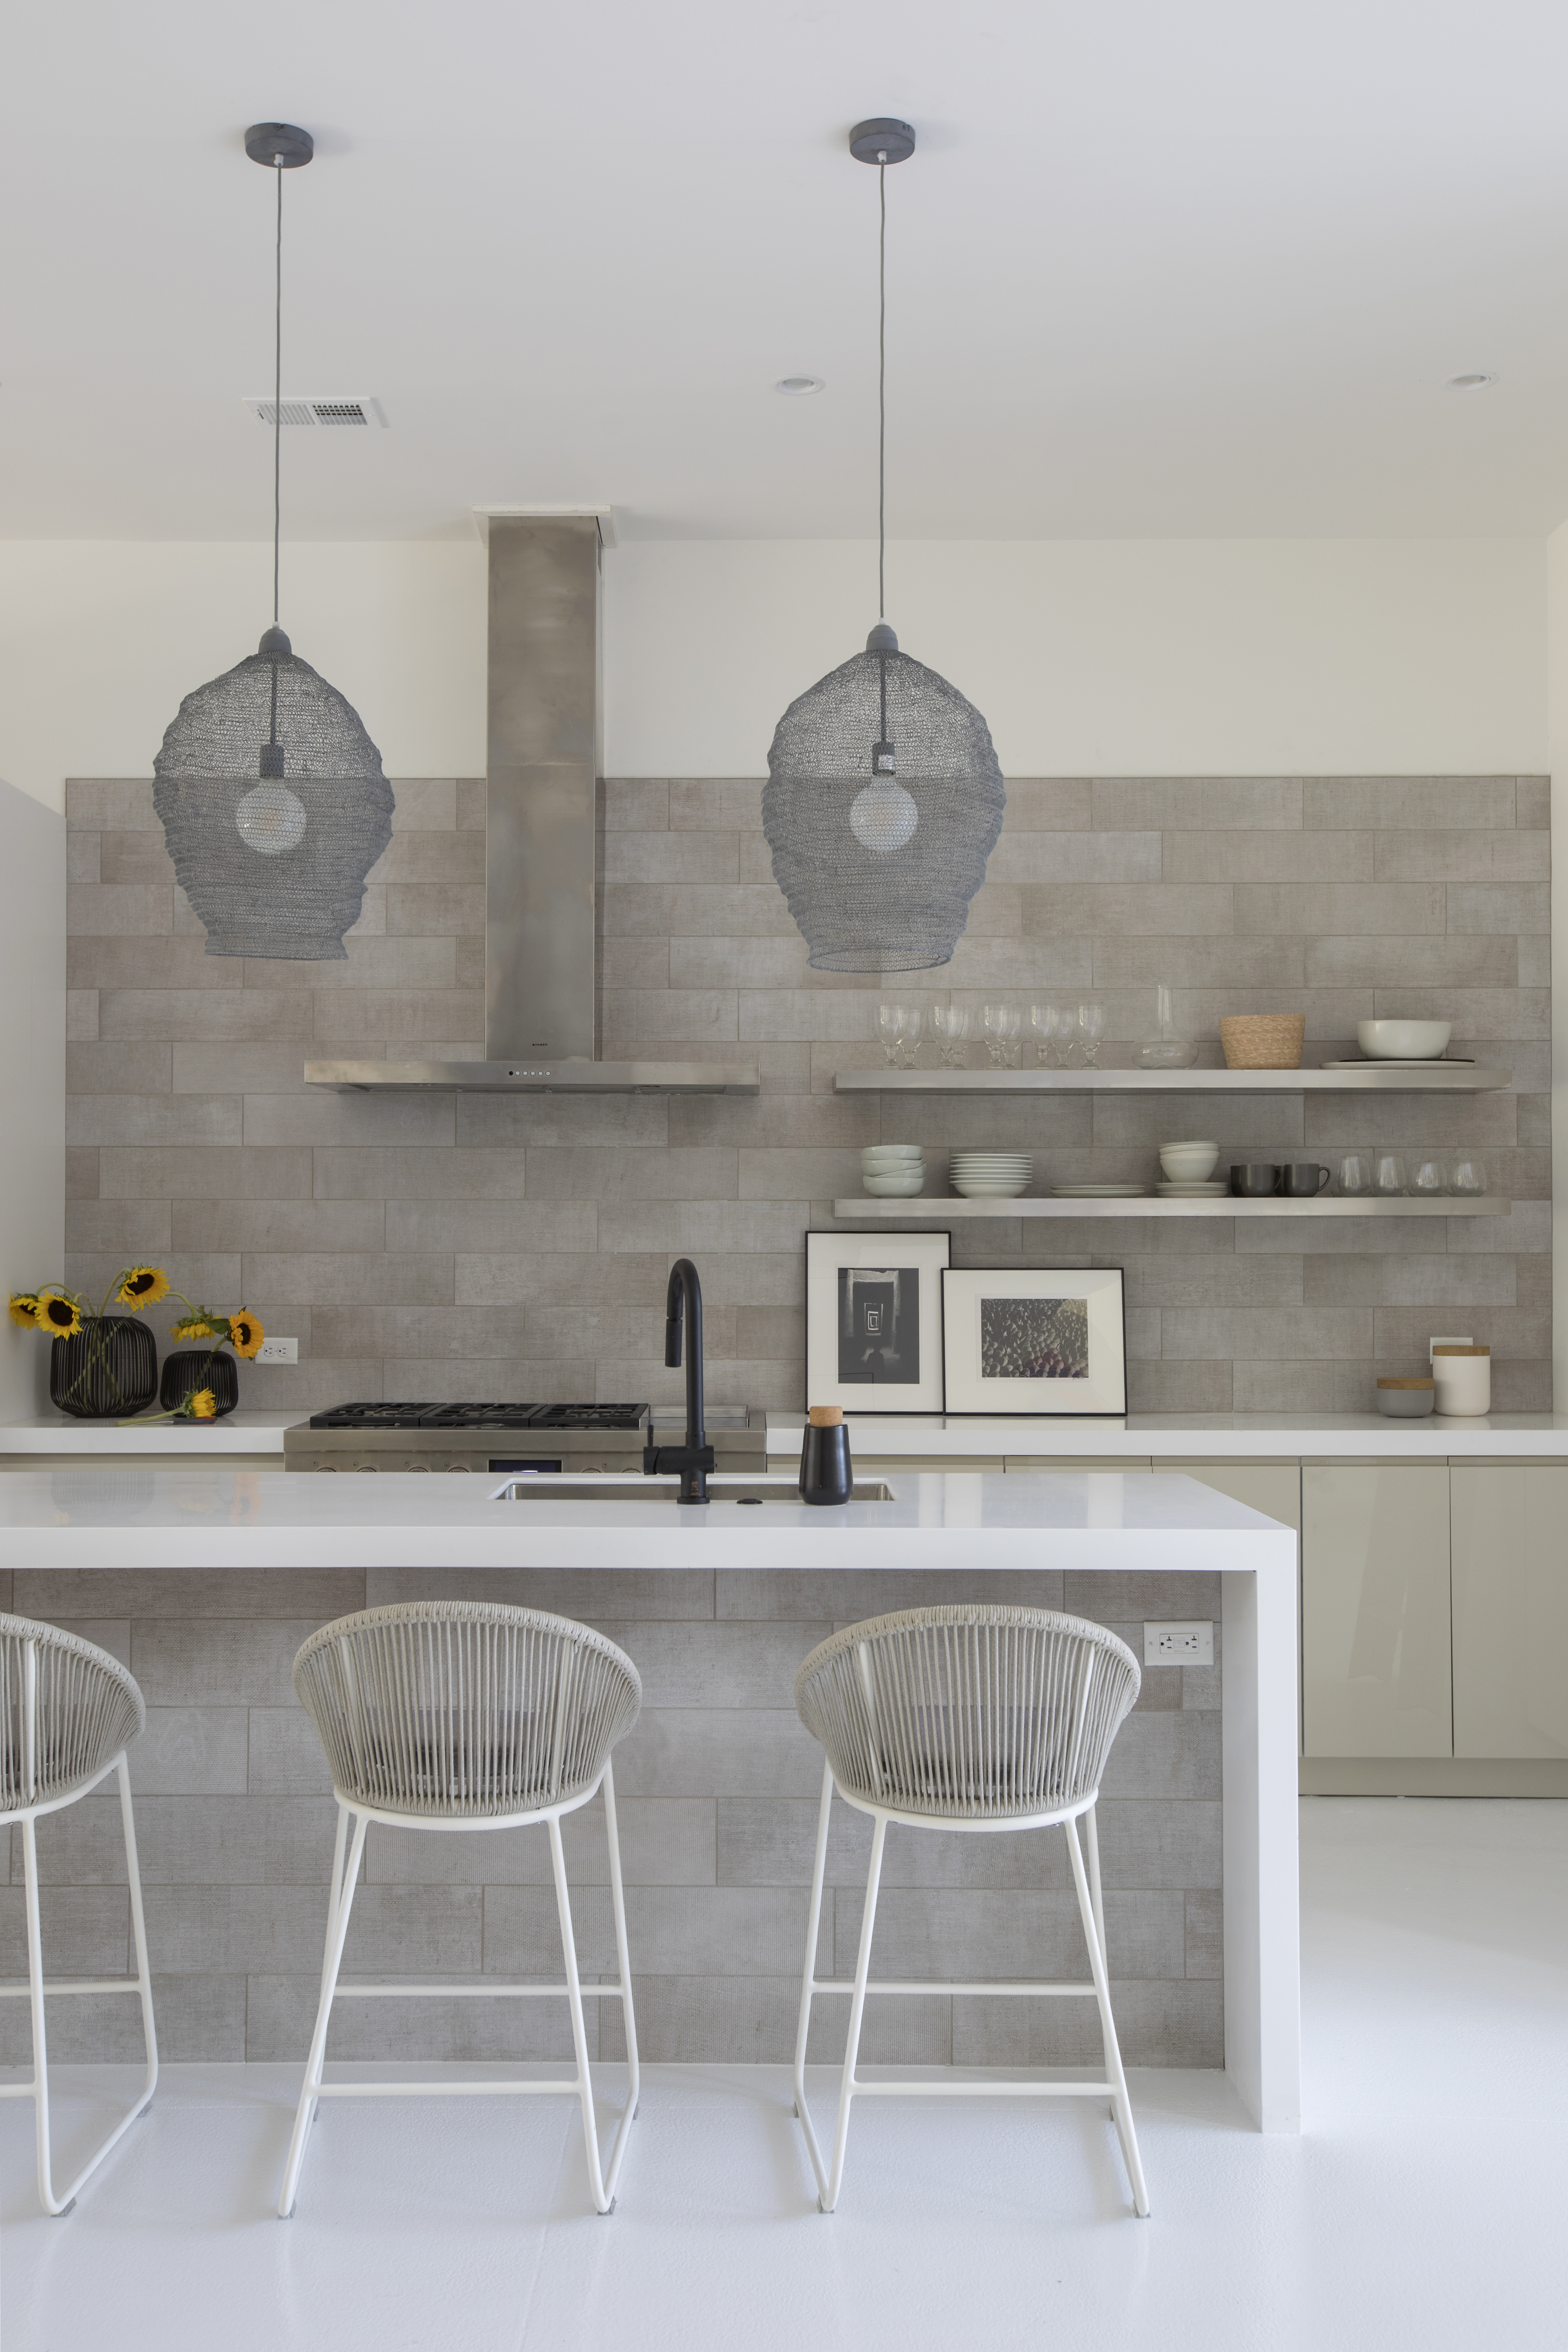 The tile—ceramic with a burlap feel on the wall and island—offers a textural backdrop for the high gloss cabinetry and matte Corian countertops.